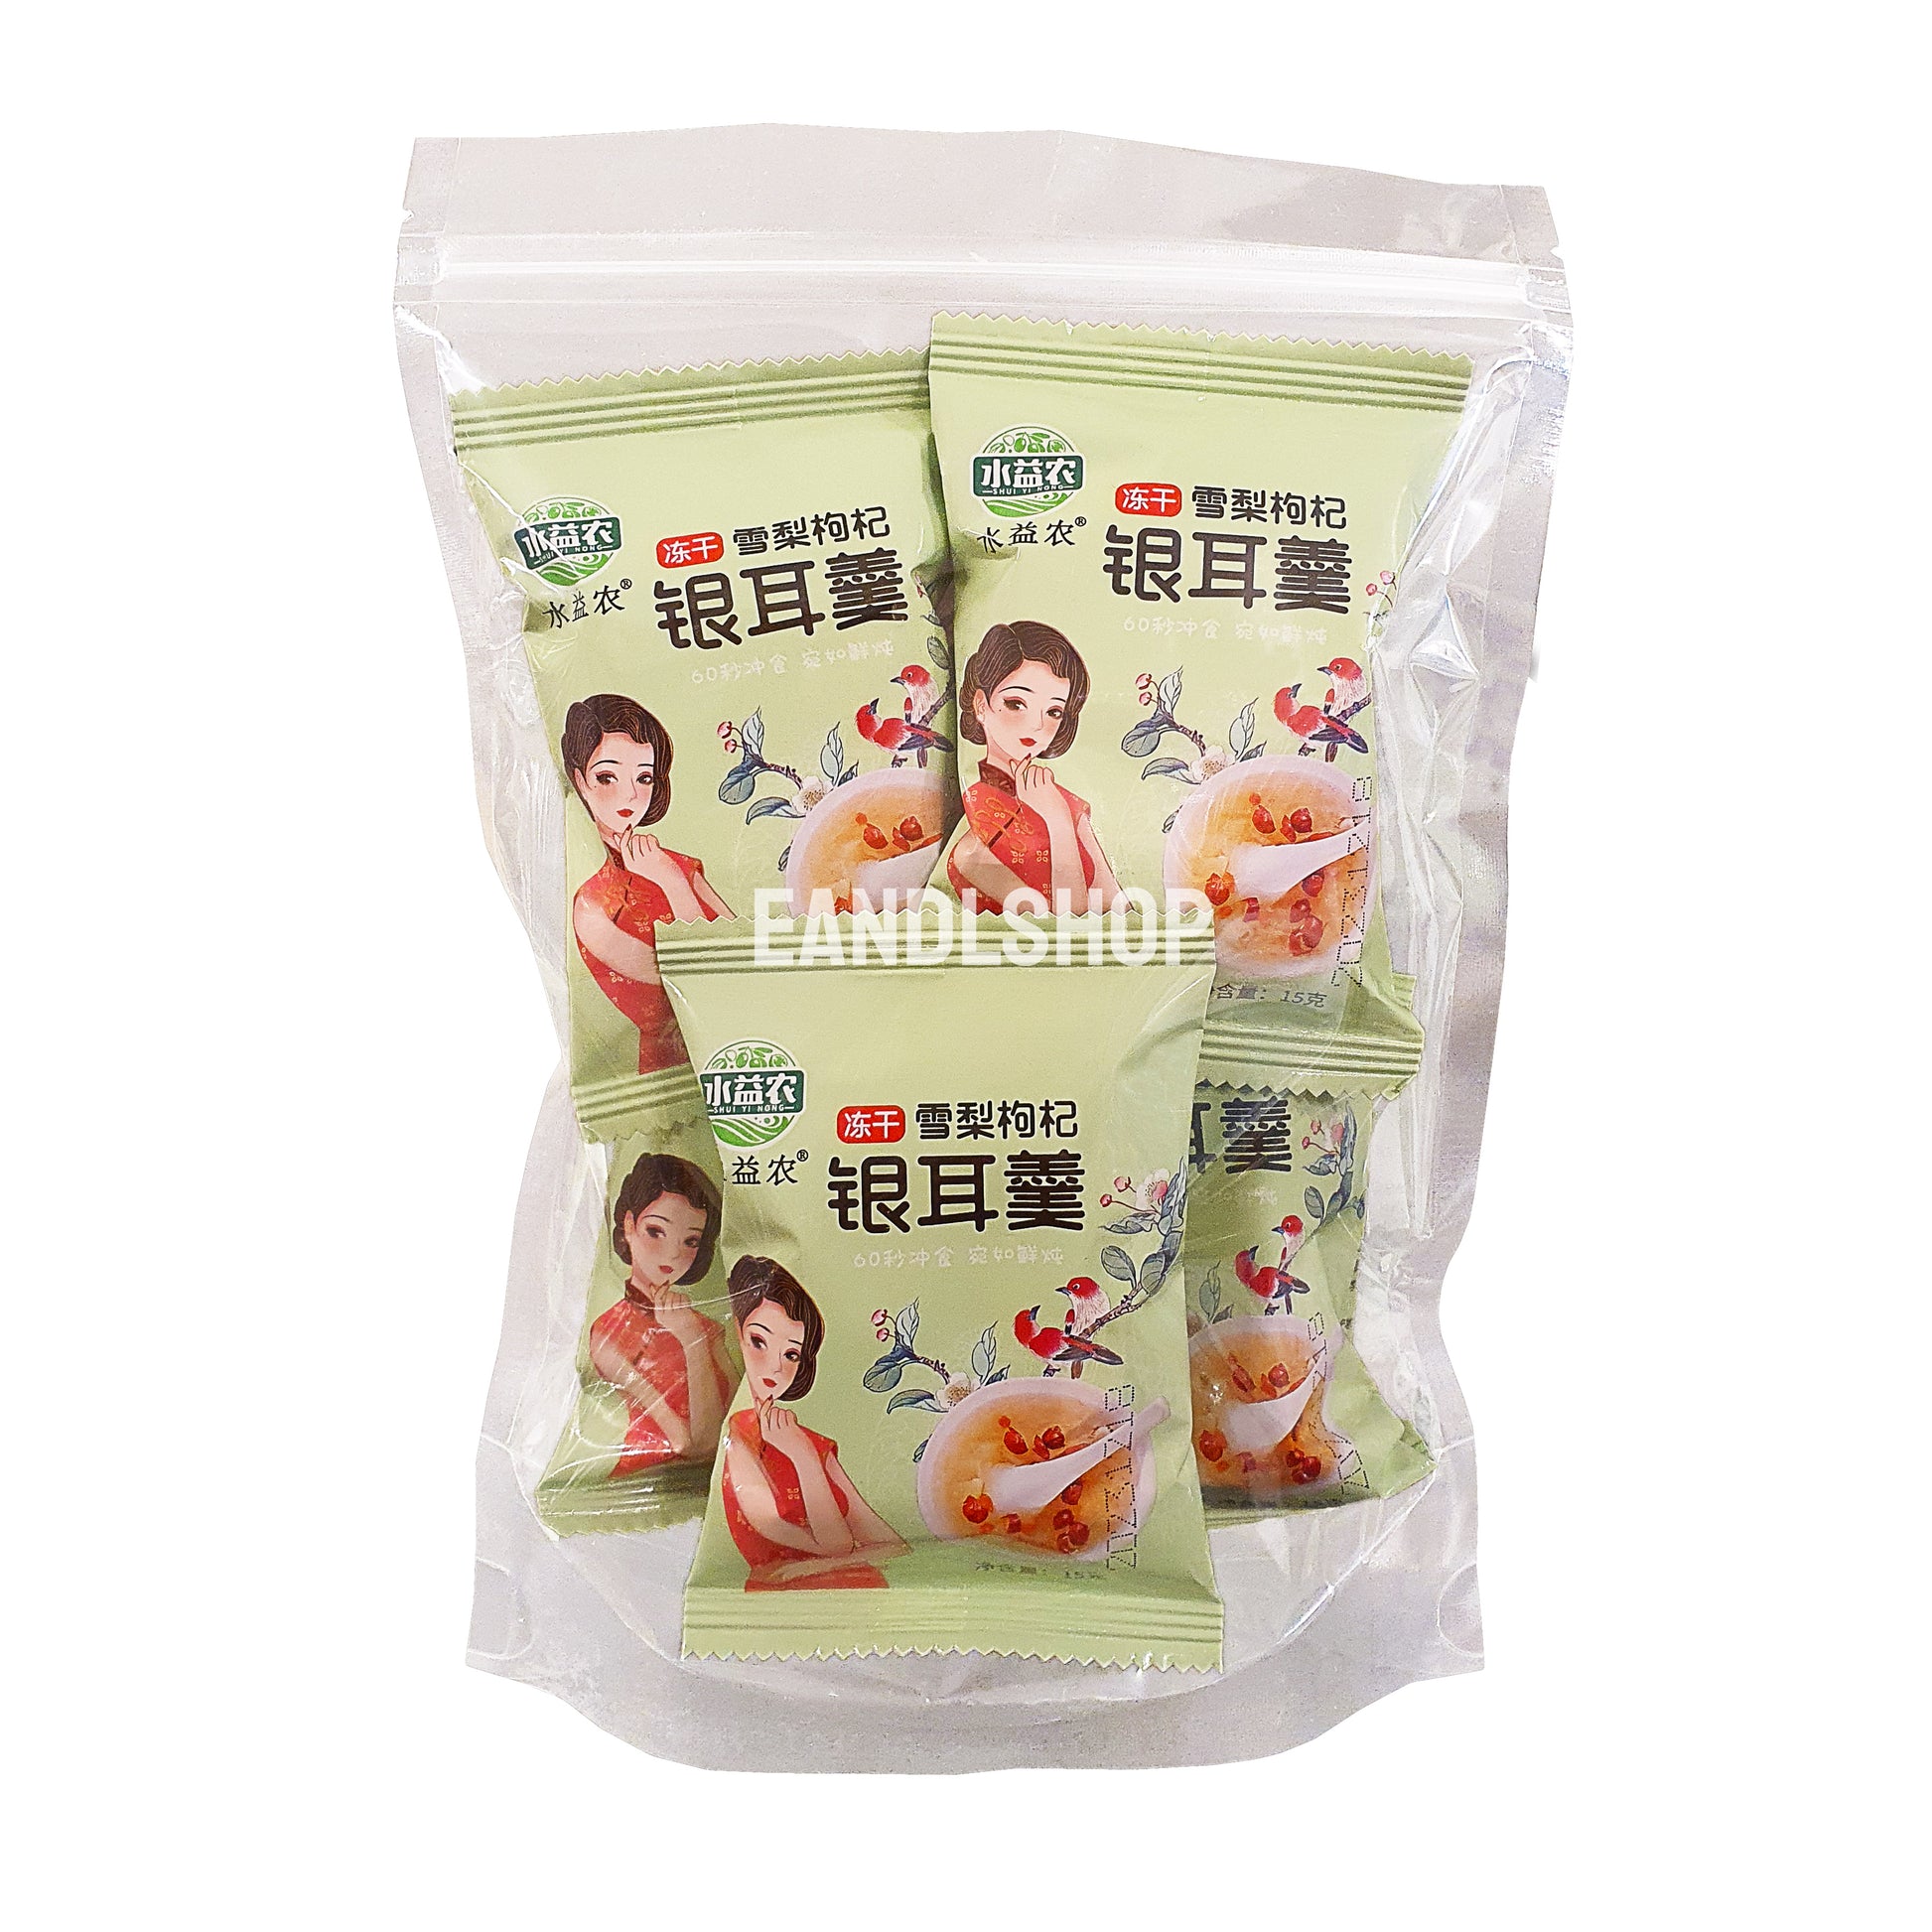 Snow Pear Wolfberry White Fungus. Old-school biscuits, modern snacks (chips, crackers), cakes, gummies, plums, dried fruits, nuts, herbal tea – available at www.EANDLSHOP.com